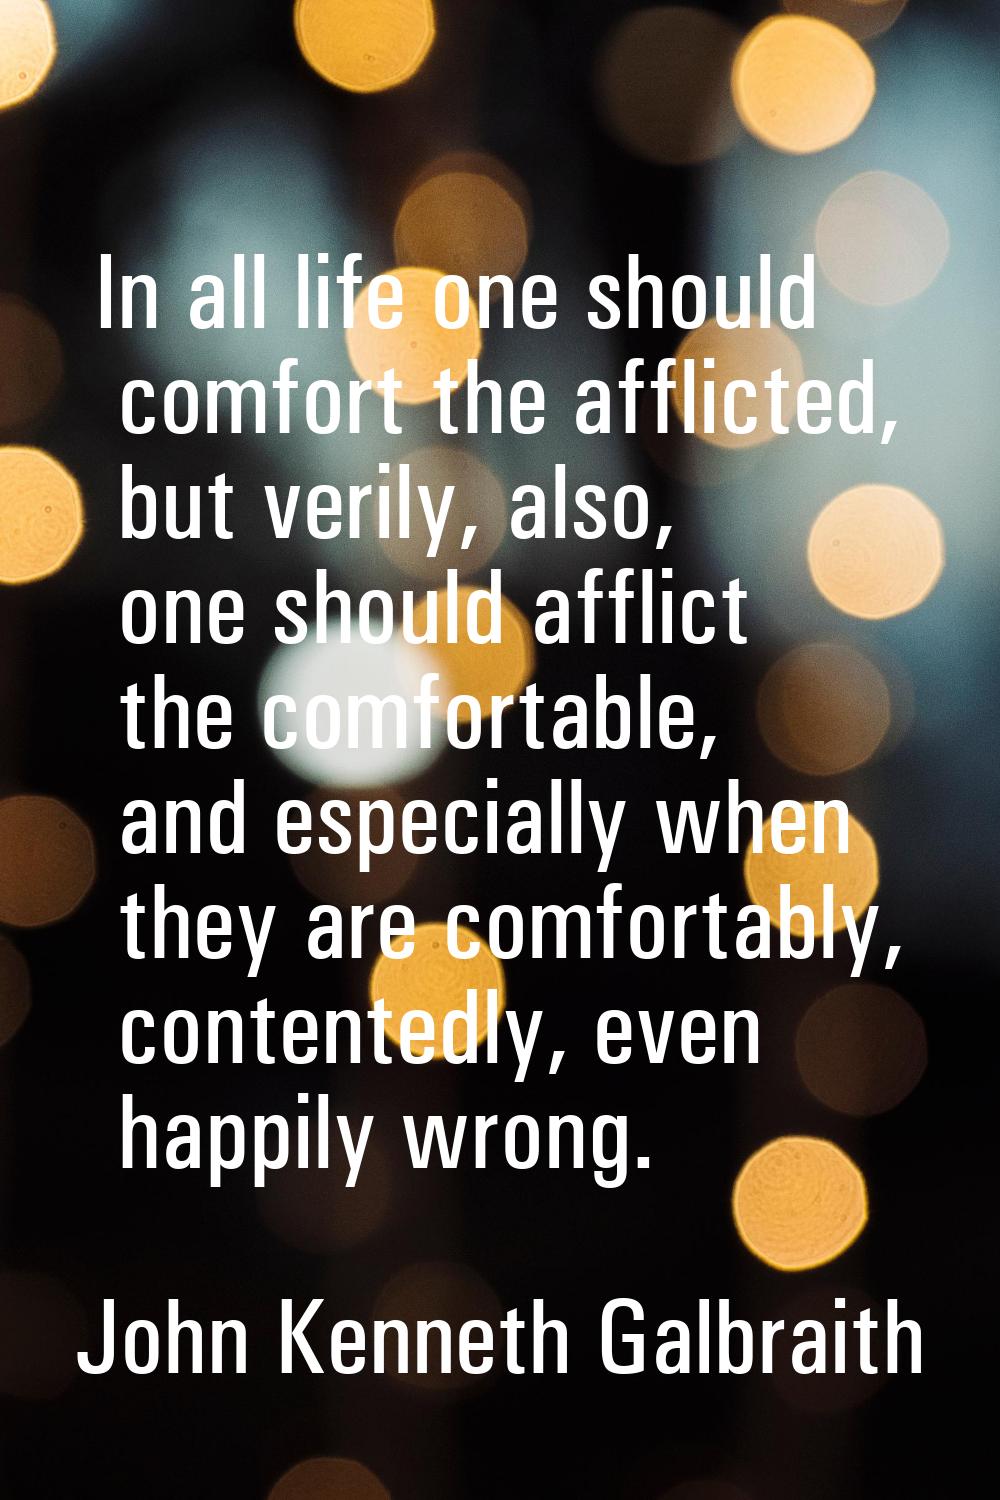 In all life one should comfort the afflicted, but verily, also, one should afflict the comfortable,